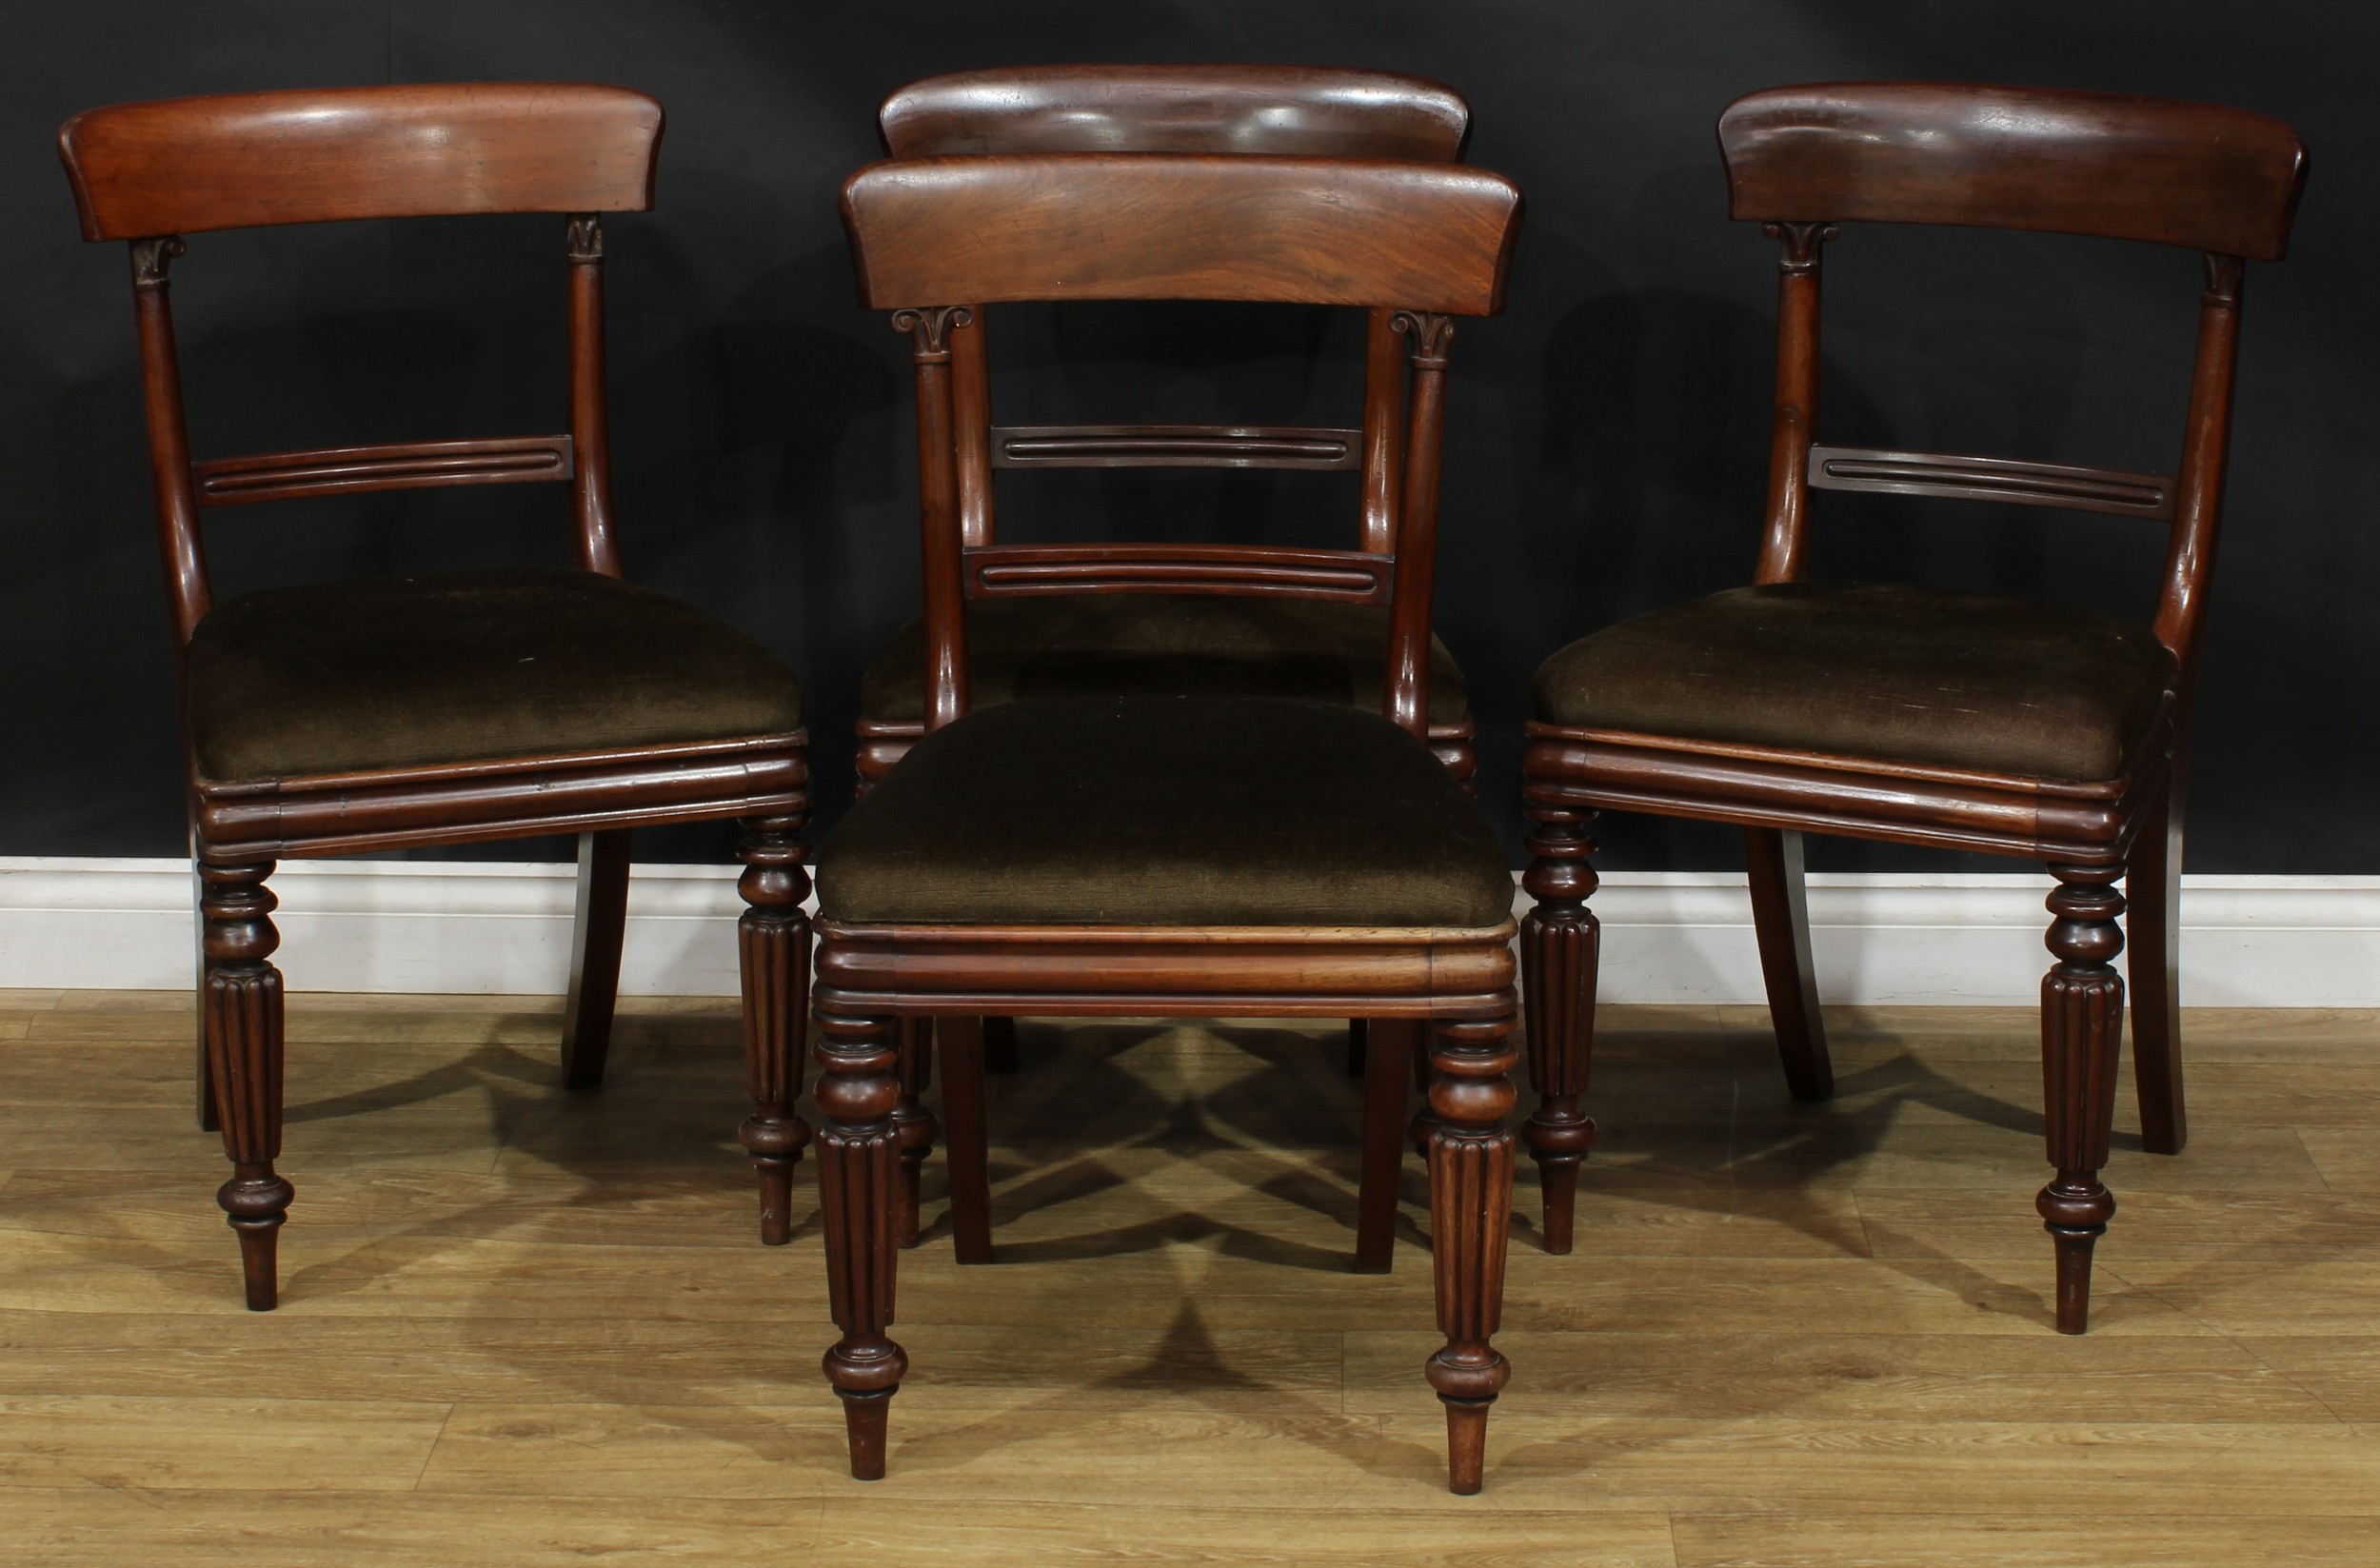 A set of four William IV mahogany dining chairs, 87.5cm high, 47cm wide, the seat 38cm deep, c.1835